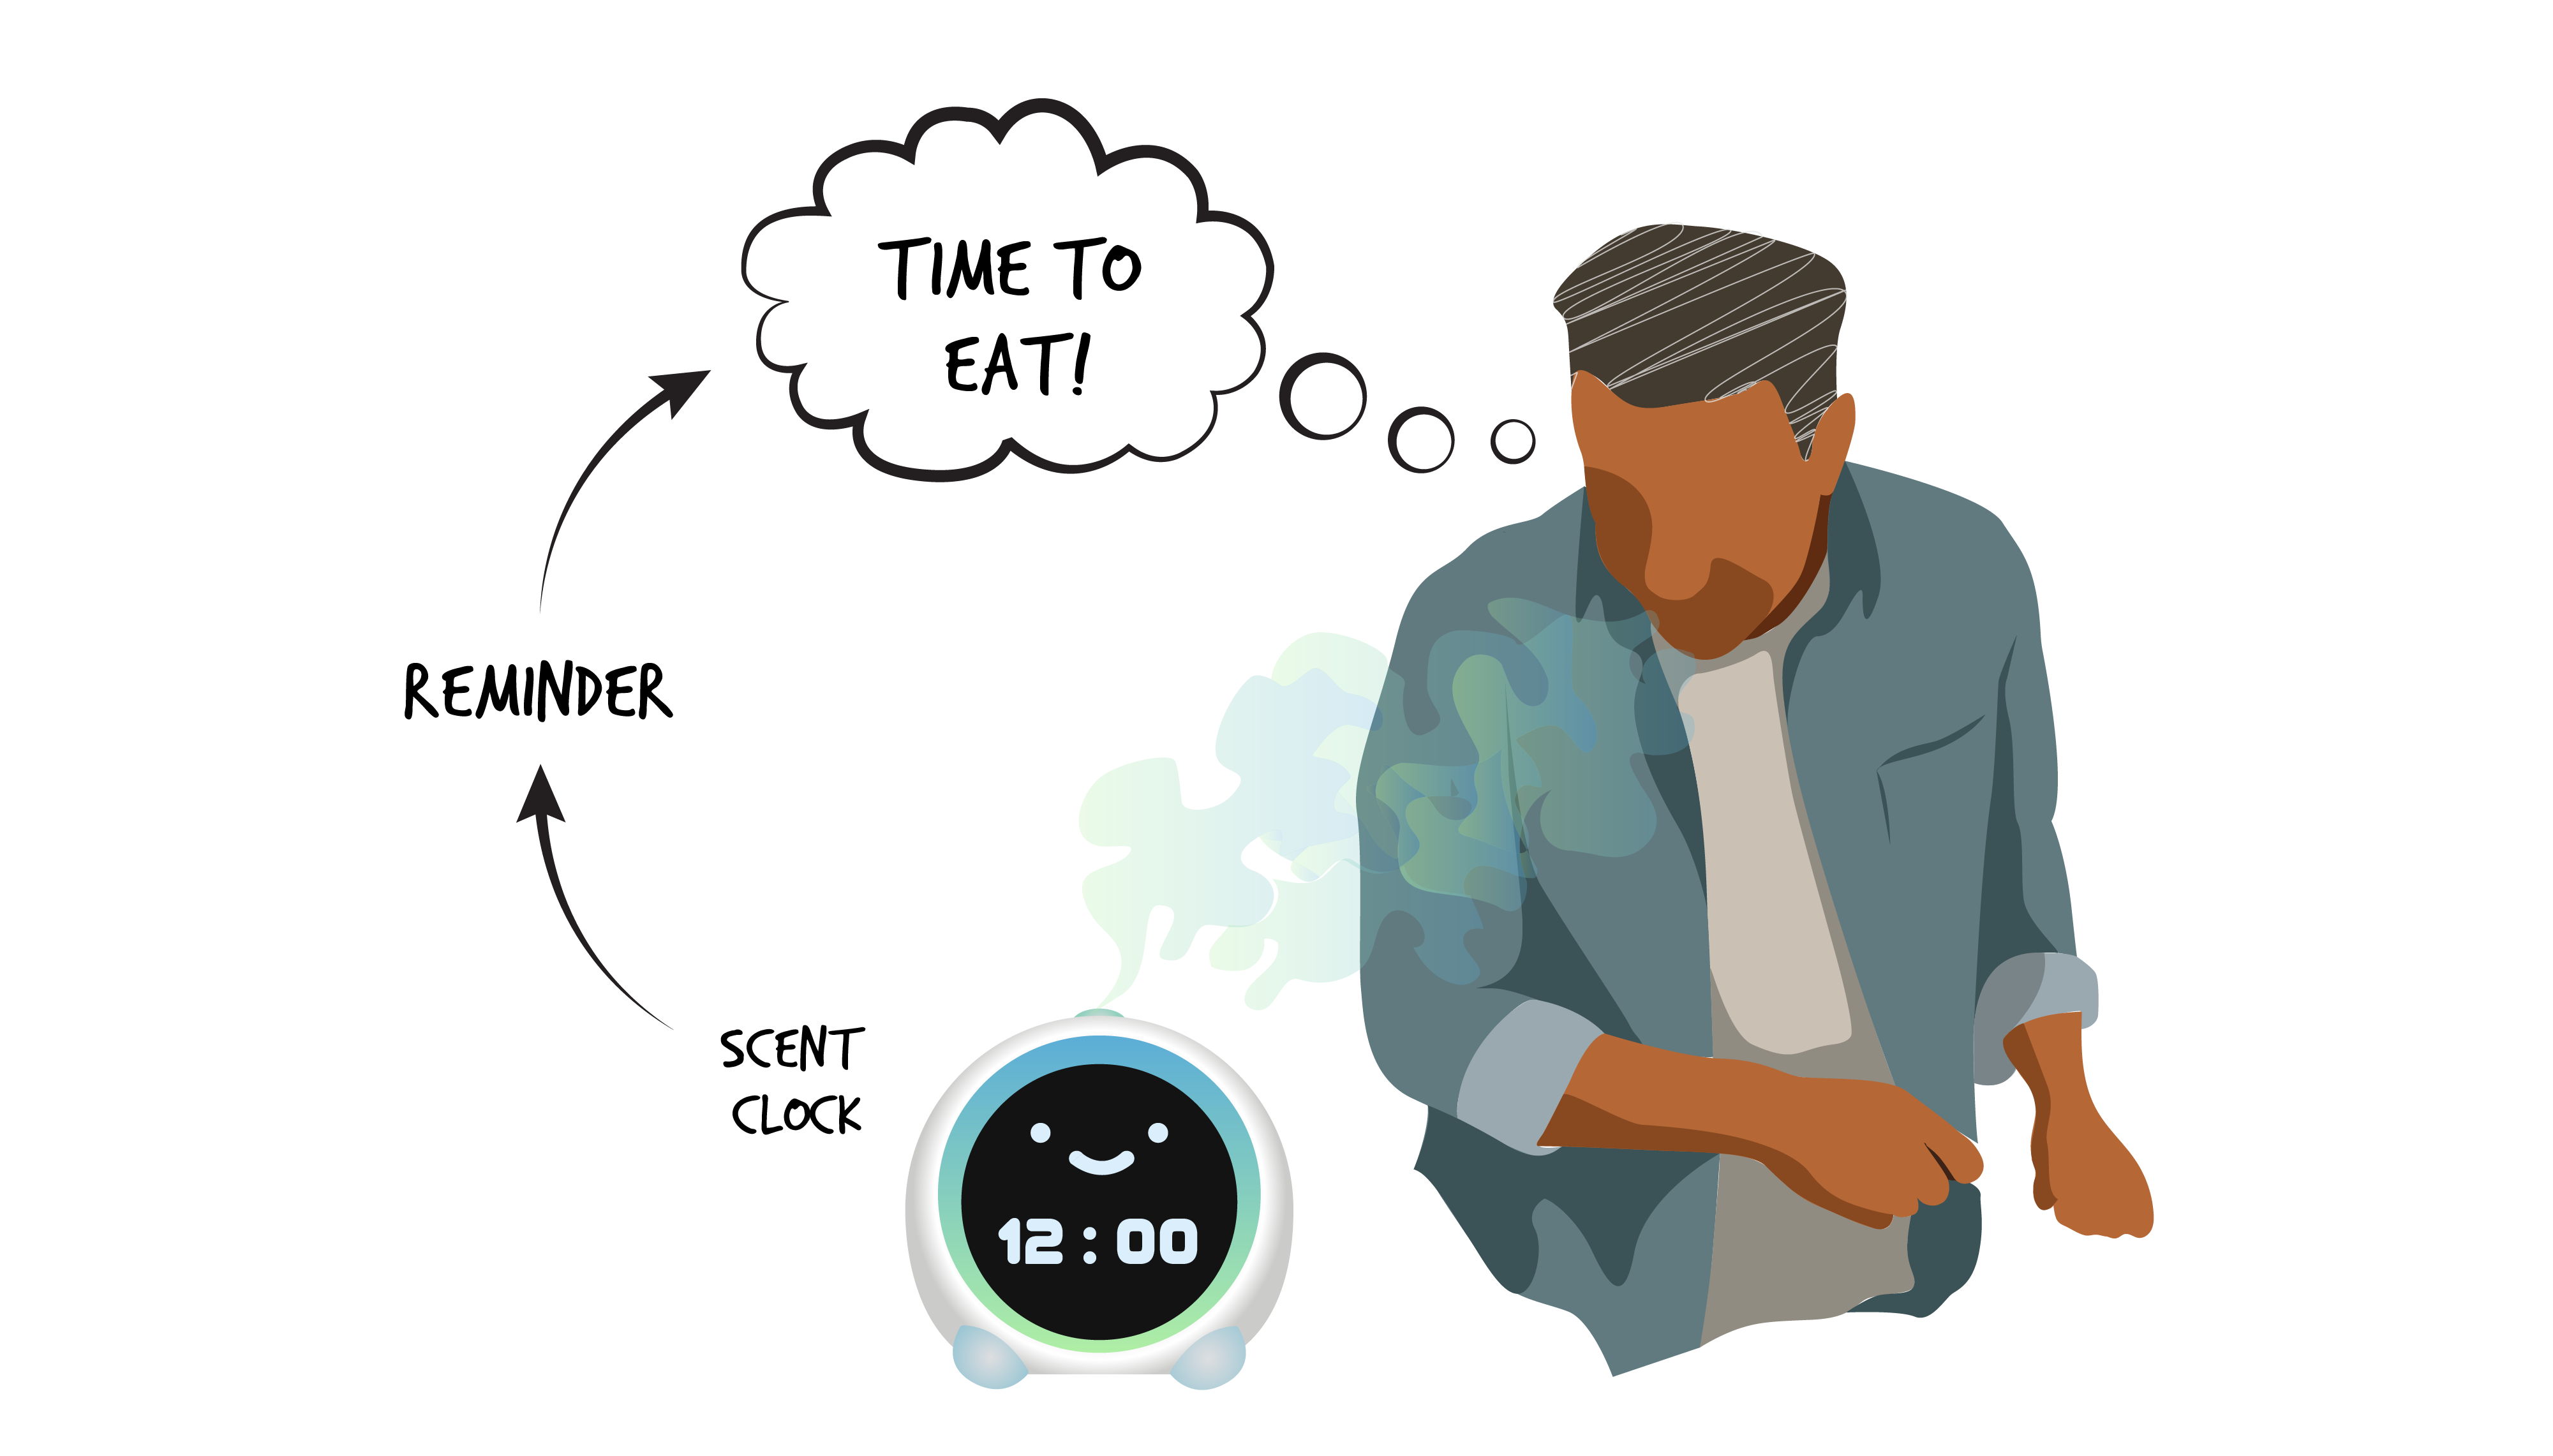 Person with short, black hair and is in white shirt facing a sliver time clock with two brown clouds coming out (one brown darker than the other). The clock shows time 12:35 and has text smell emitting clock with an arrow pointing to it. Thought bubble coming out from person's head with text time to eat! inside, and text reminder with arrow pointing to it.